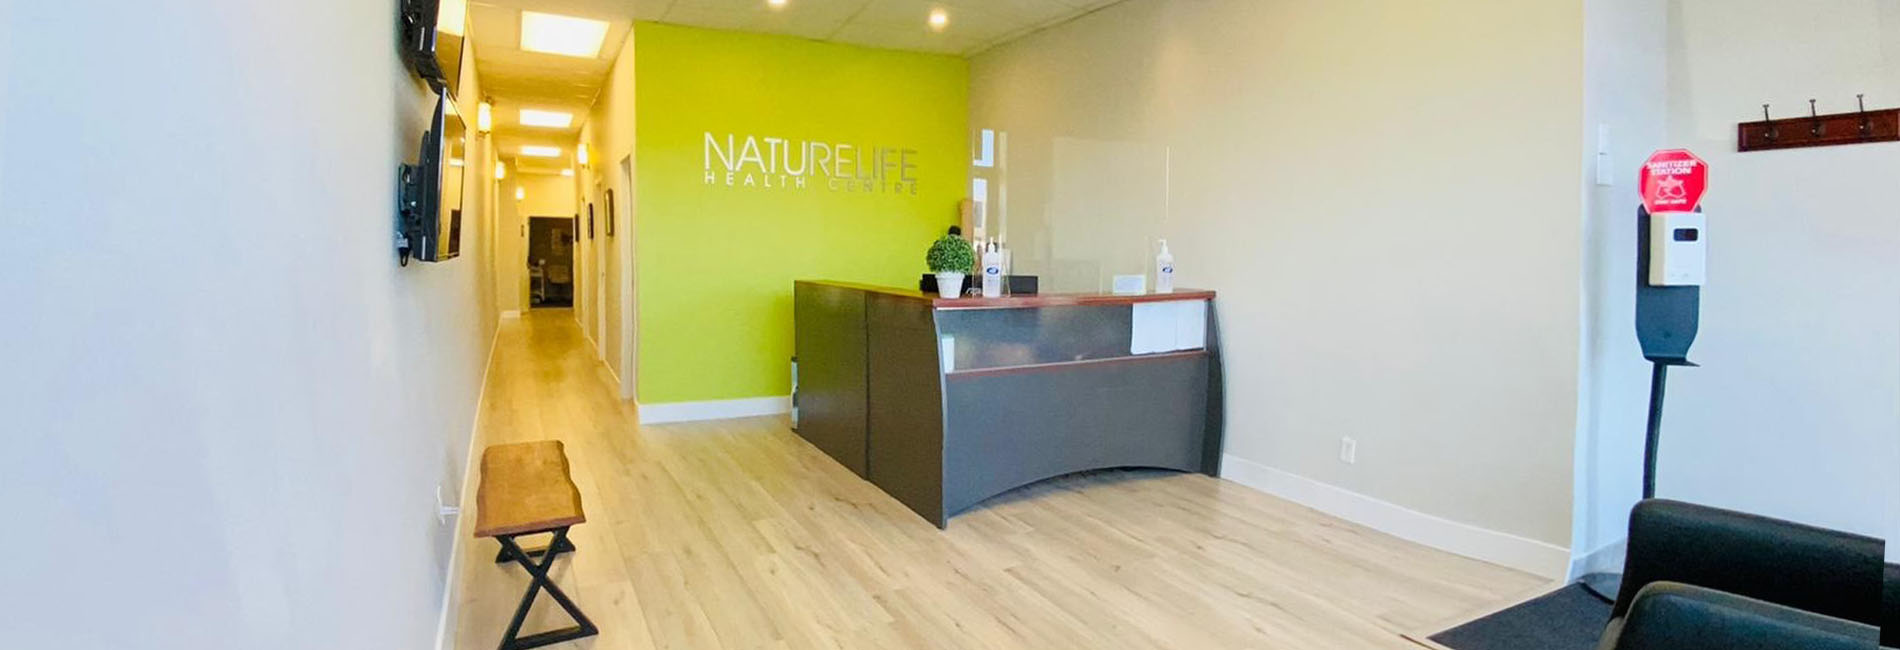 Welcome to Naturelife Health Centre